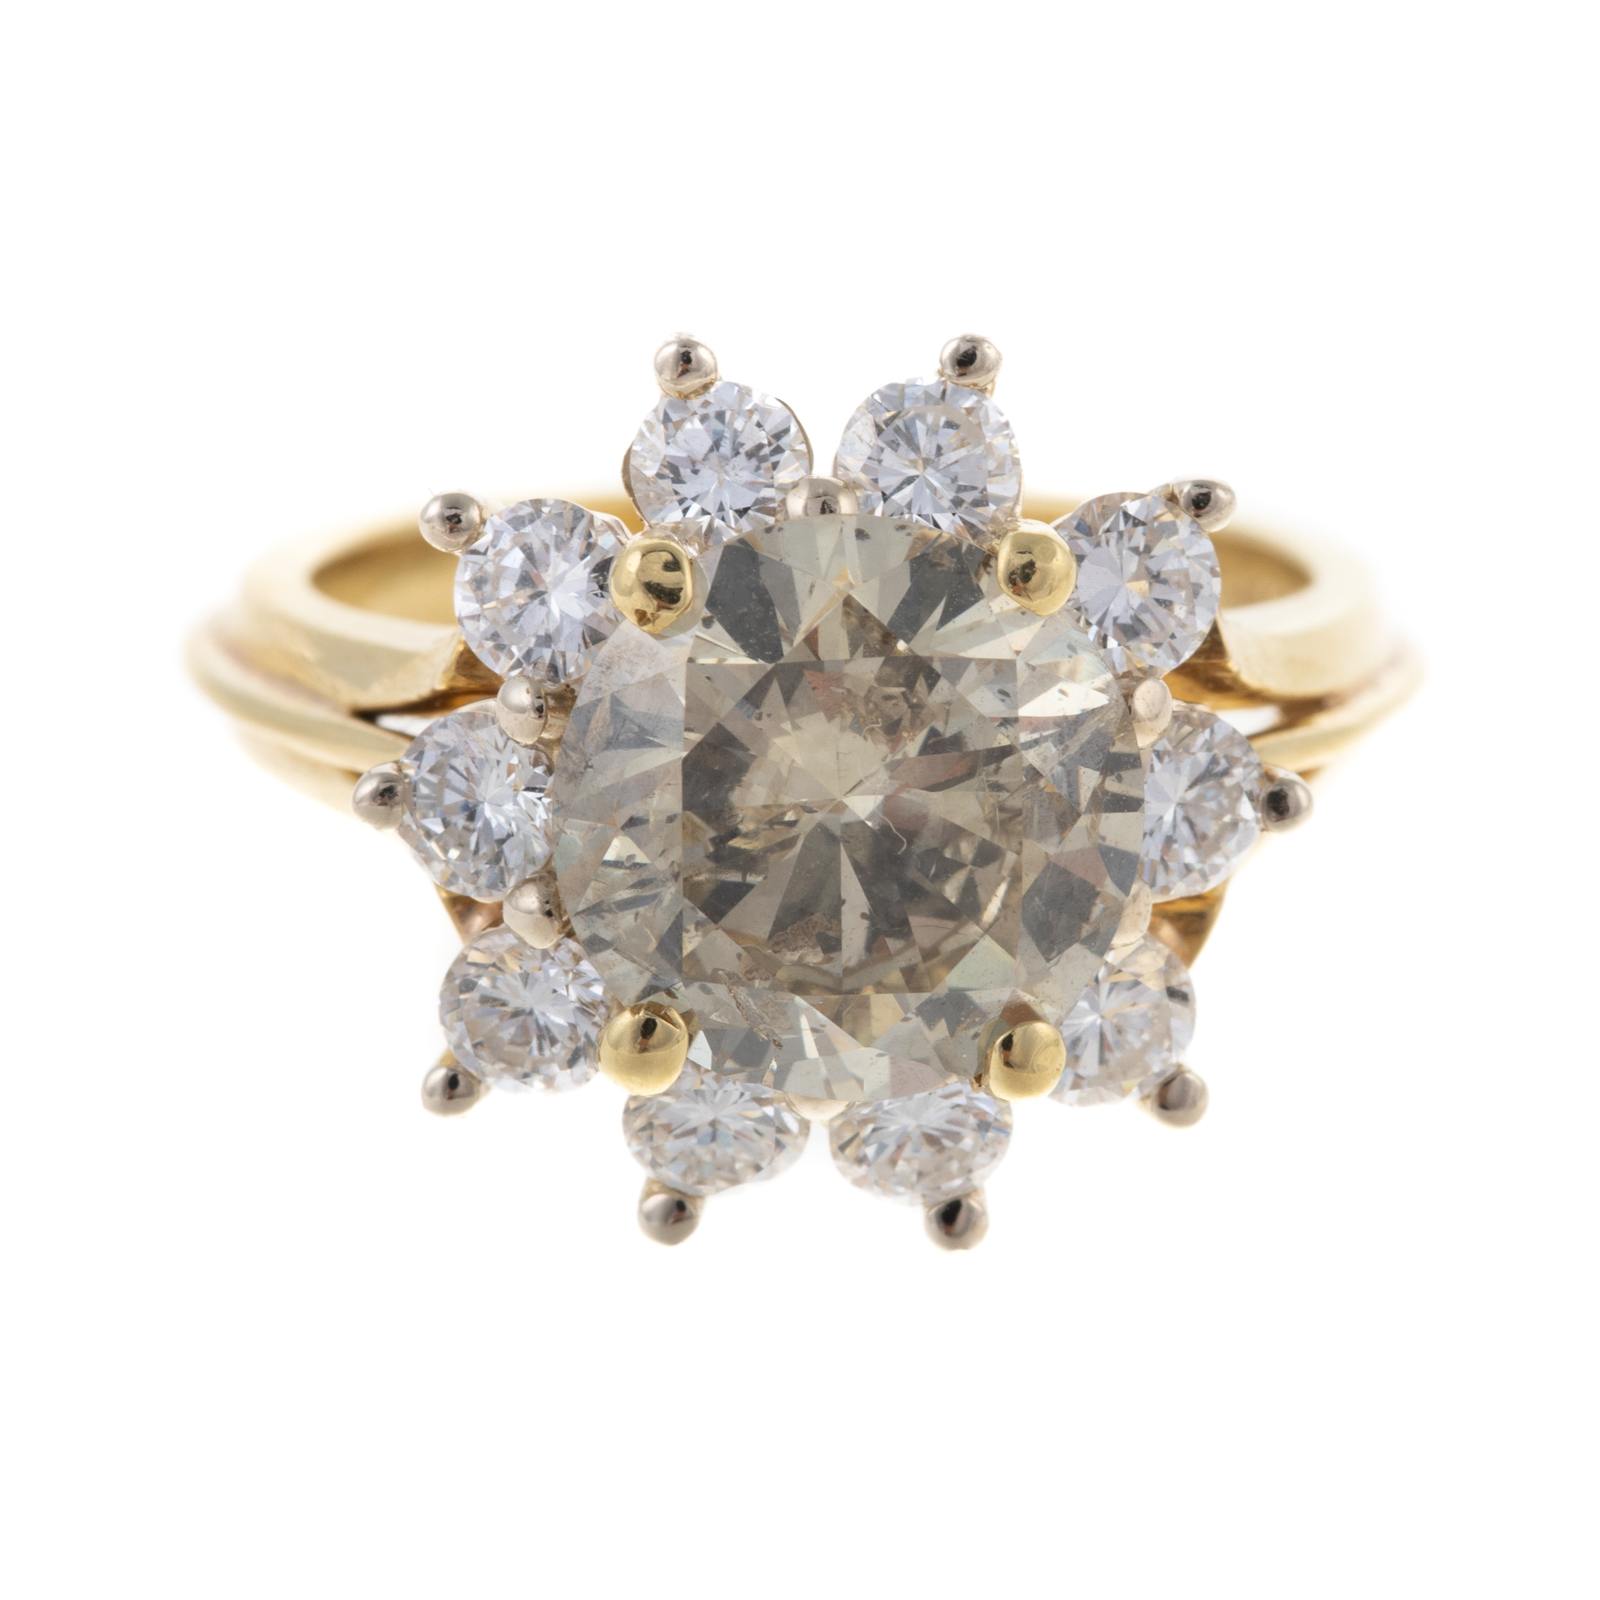 A 2.51 CT CHAMPAGNE DIAMOND RING